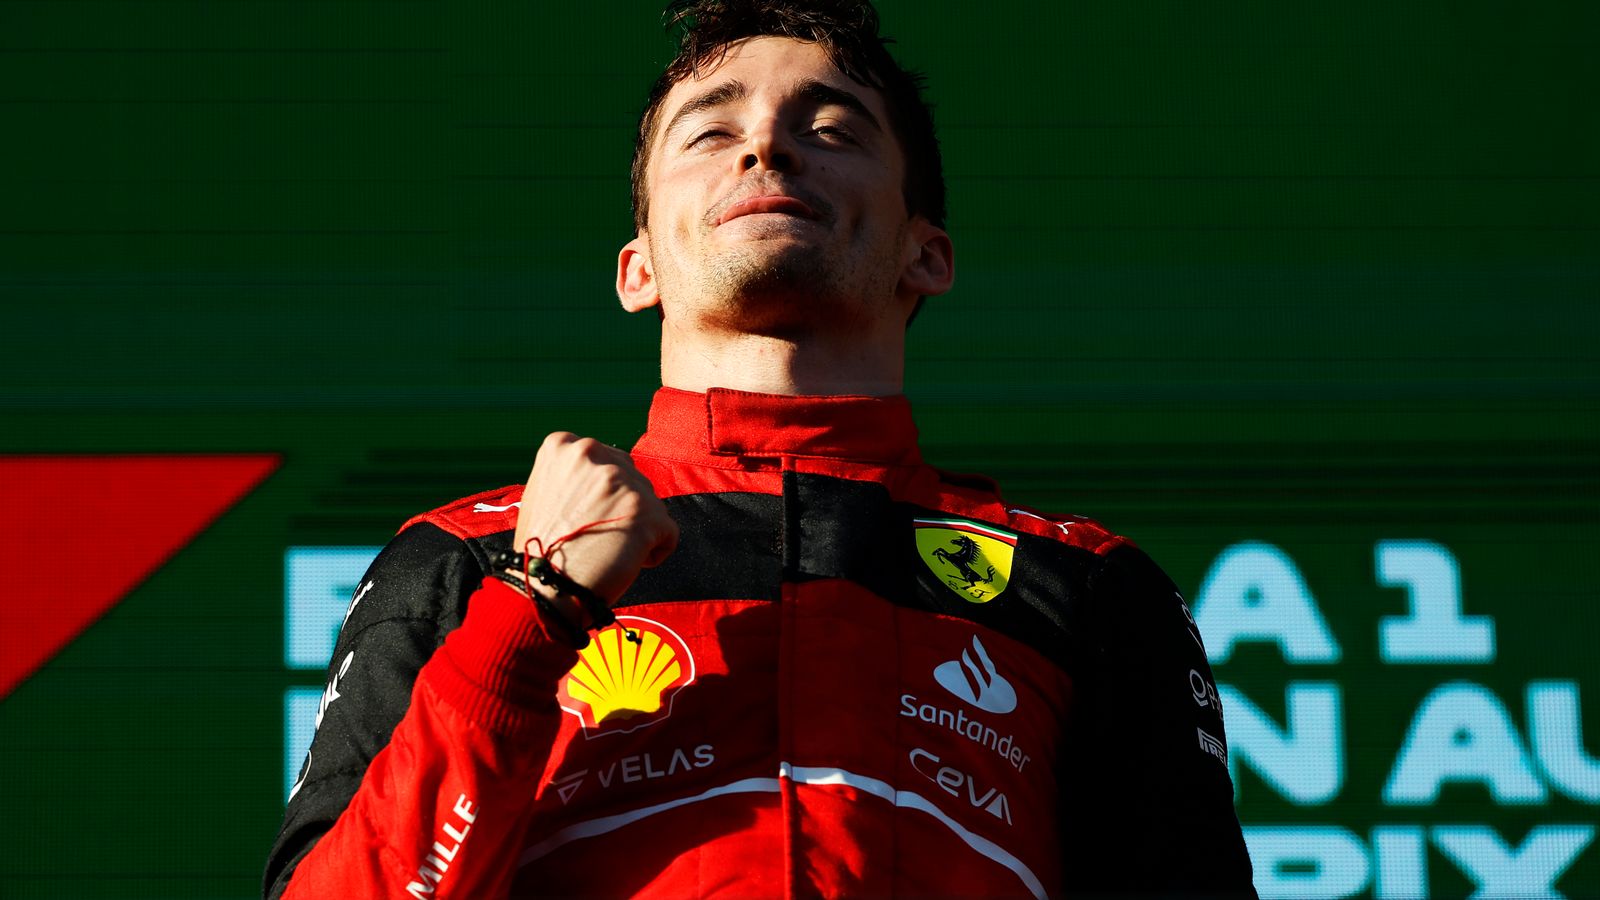 australian-gp-charles-leclerc-takes-dominant-win-as-max-verstappen-suffers-another-red-bull-dnf